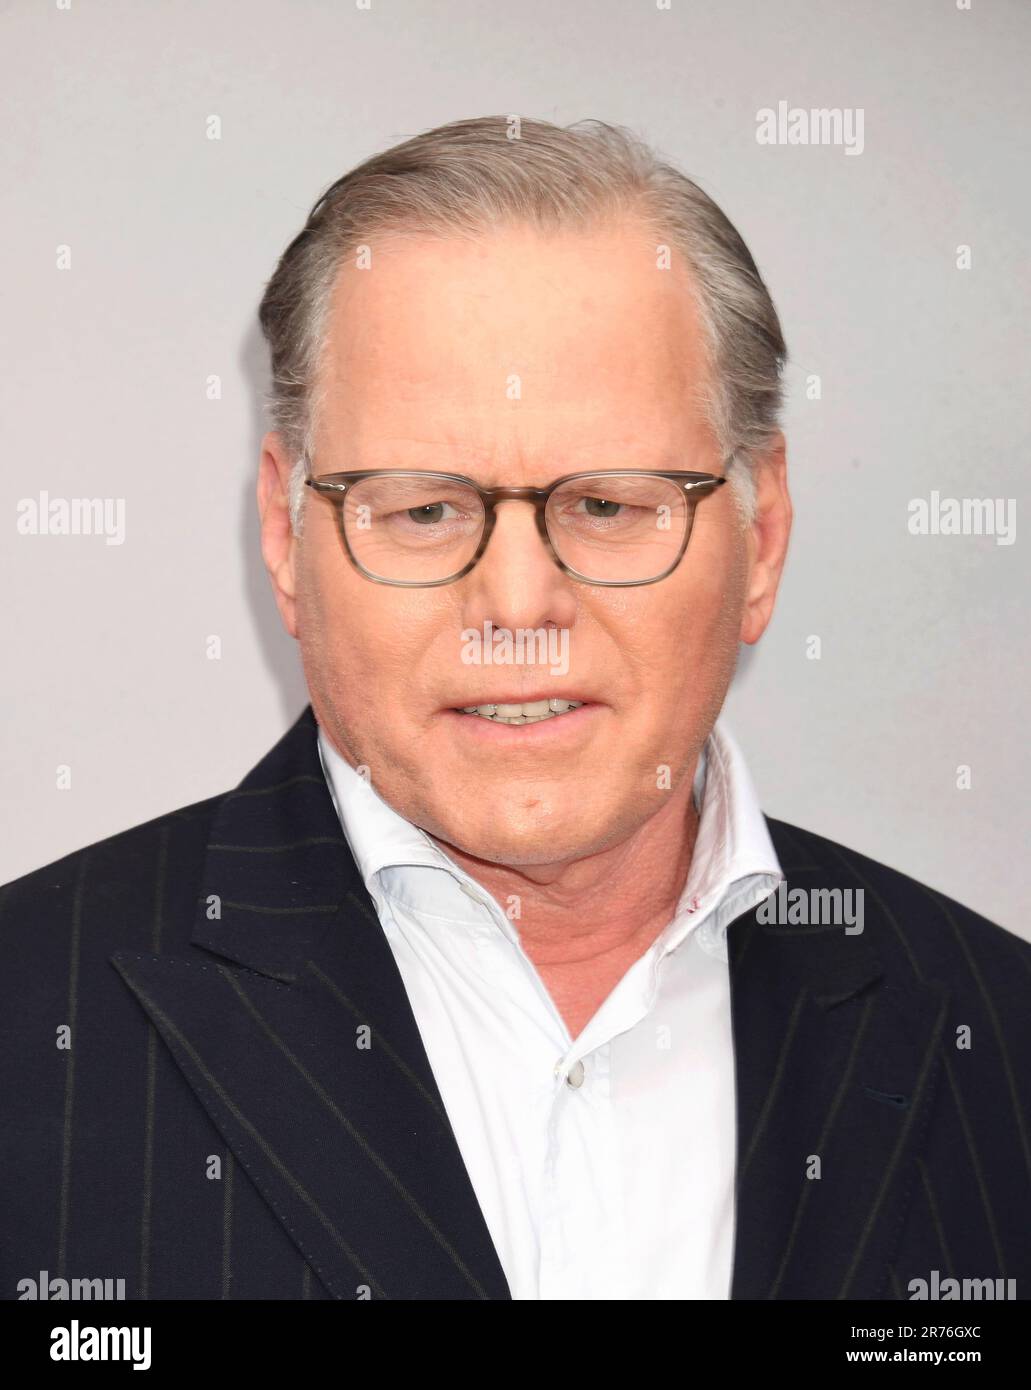 Hollywood, California, USA. 12th June, 2023. CEO Warner Bros. Discovery David Zaslav attends the Los Angeles premiere of Warner Bros. 'The Flash' at Ovation Hollywood on June 12, 2023 in Hollywood, California. Credit: Jeffrey Mayer/Jtm Photos/Media Punch/Alamy Live News Stock Photo